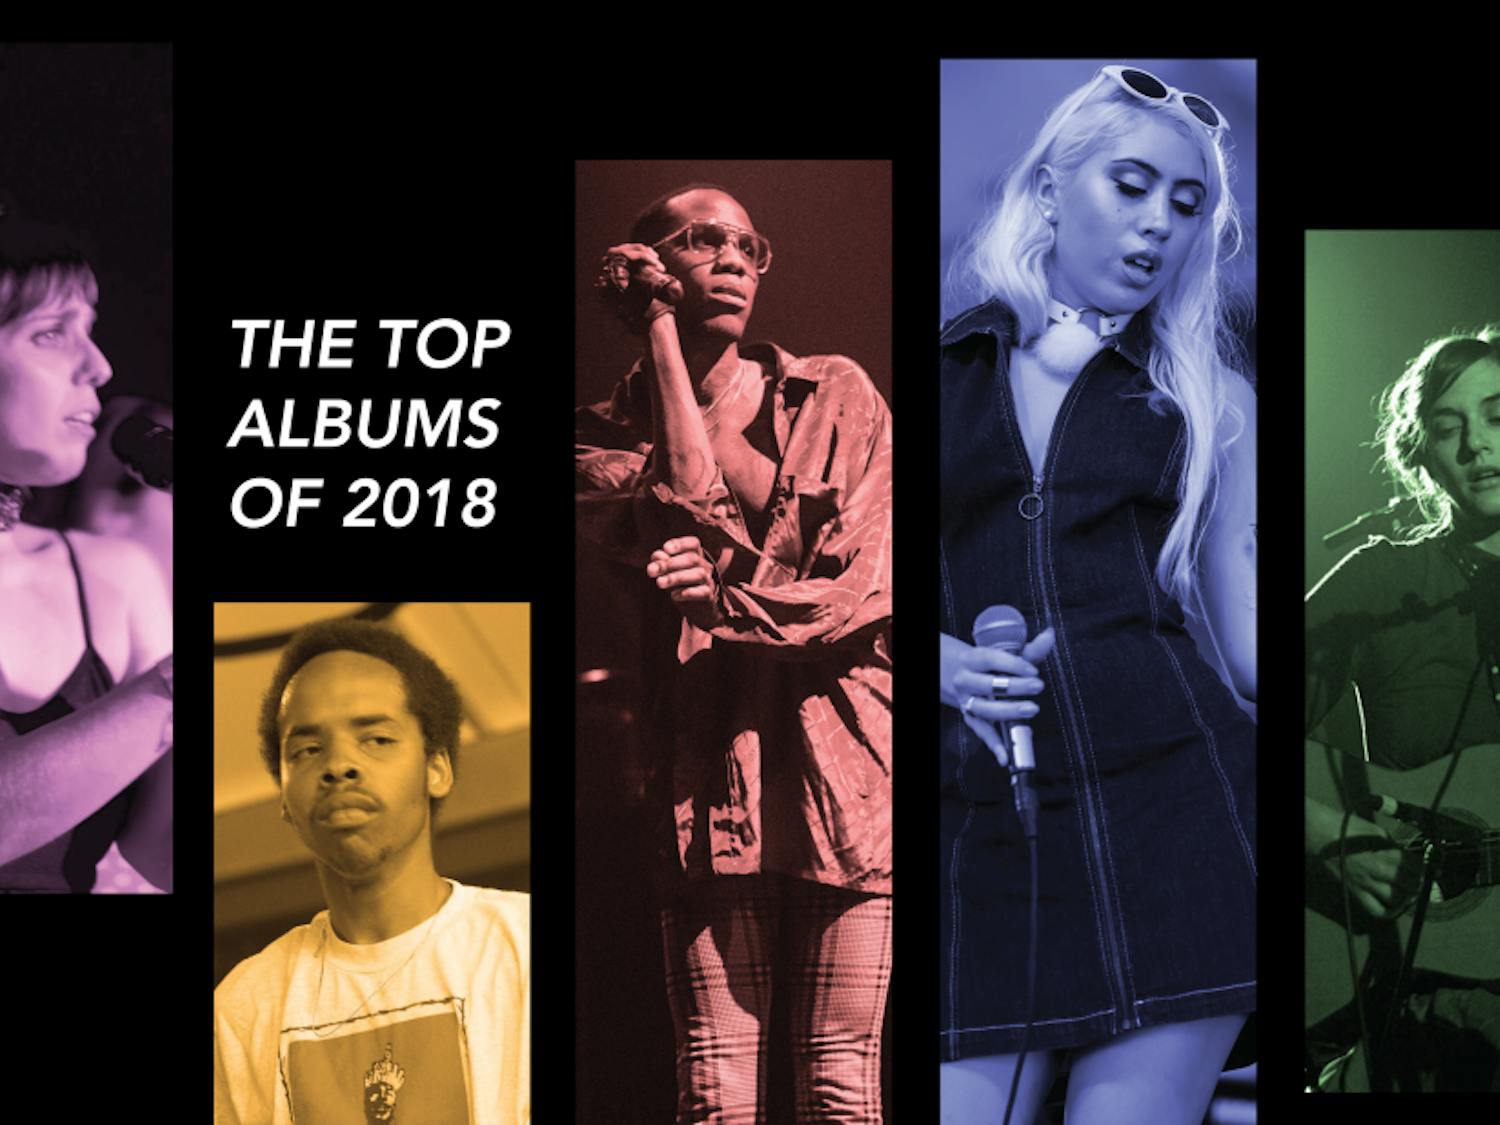 A number of artists released great albums in 2018. From left: U.S. Girls' Meg Remy, Earl Sweatshirt, Yves Tumor, Kali Uchis and Josephine Foster.